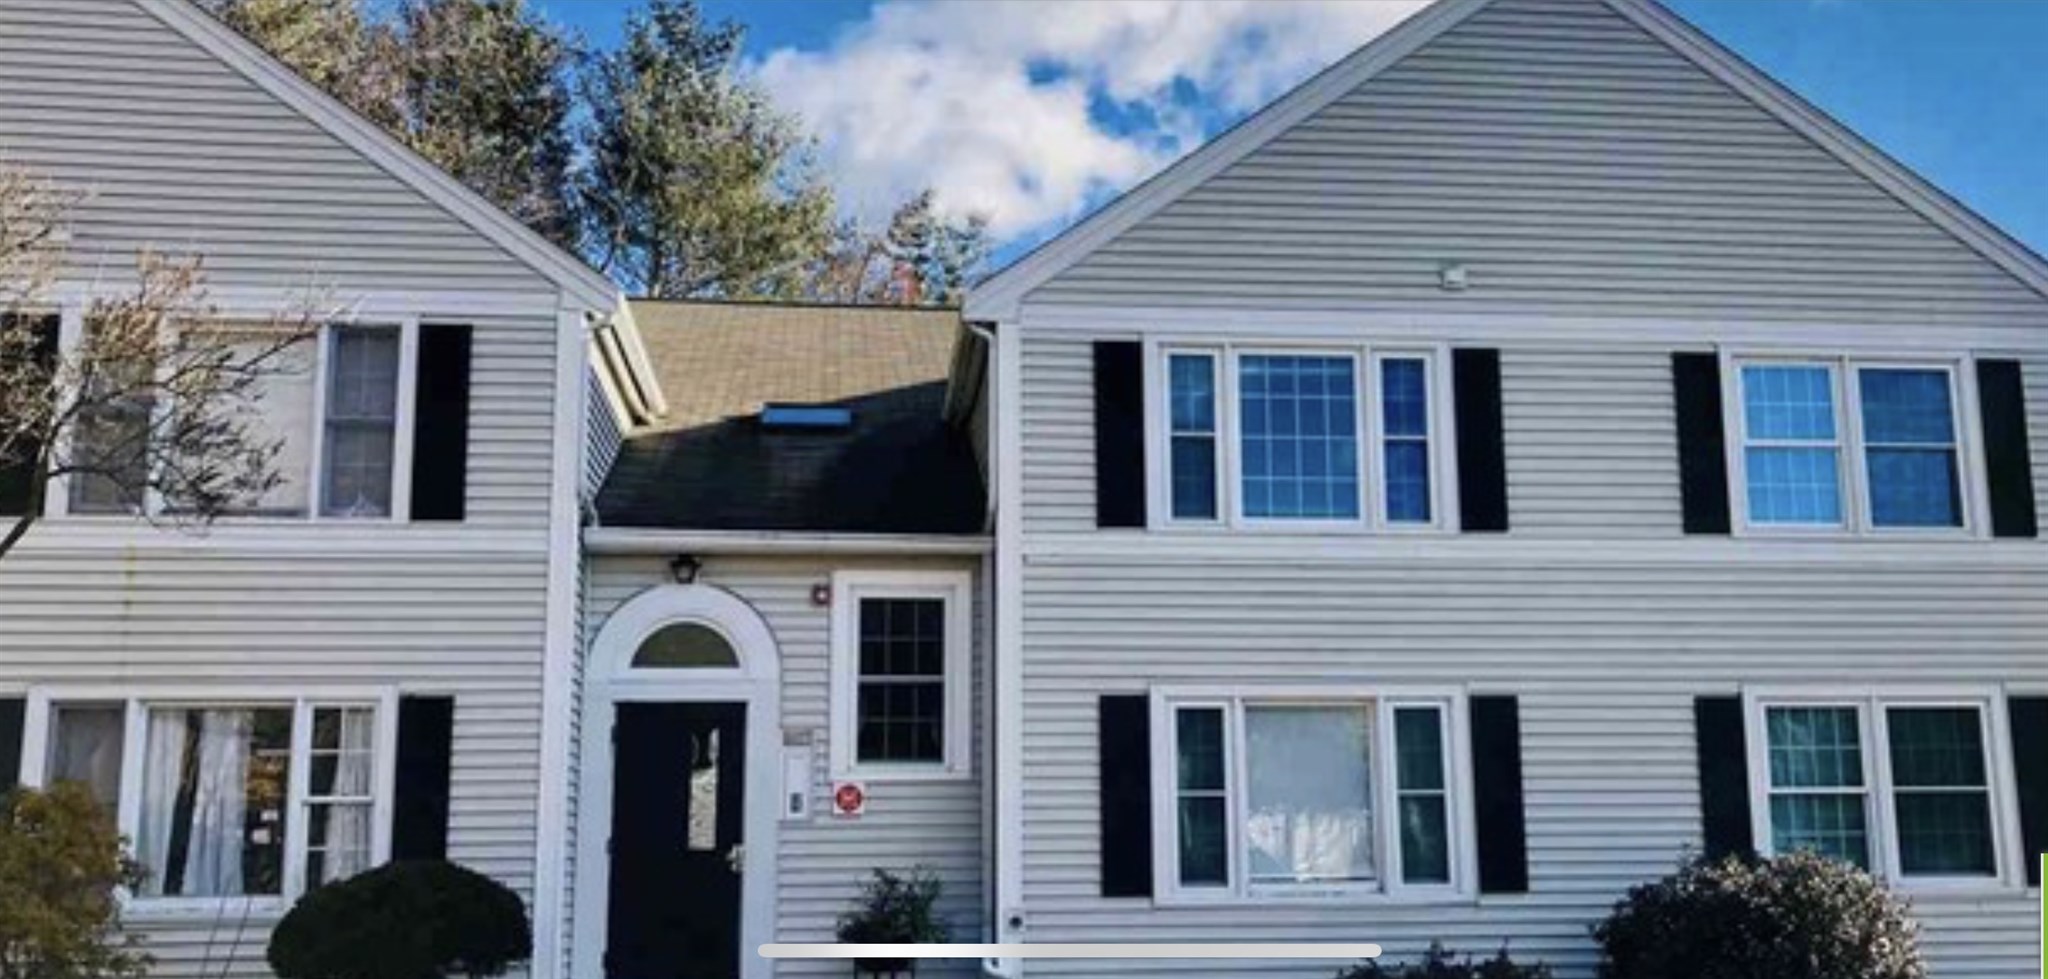 50 Brookside Drive, Exeter, New Hampshire, NH 03833, 2 Bedrooms Bedrooms, 4 Rooms Rooms,1 BathroomBathrooms,Condos,For Rent,4930467